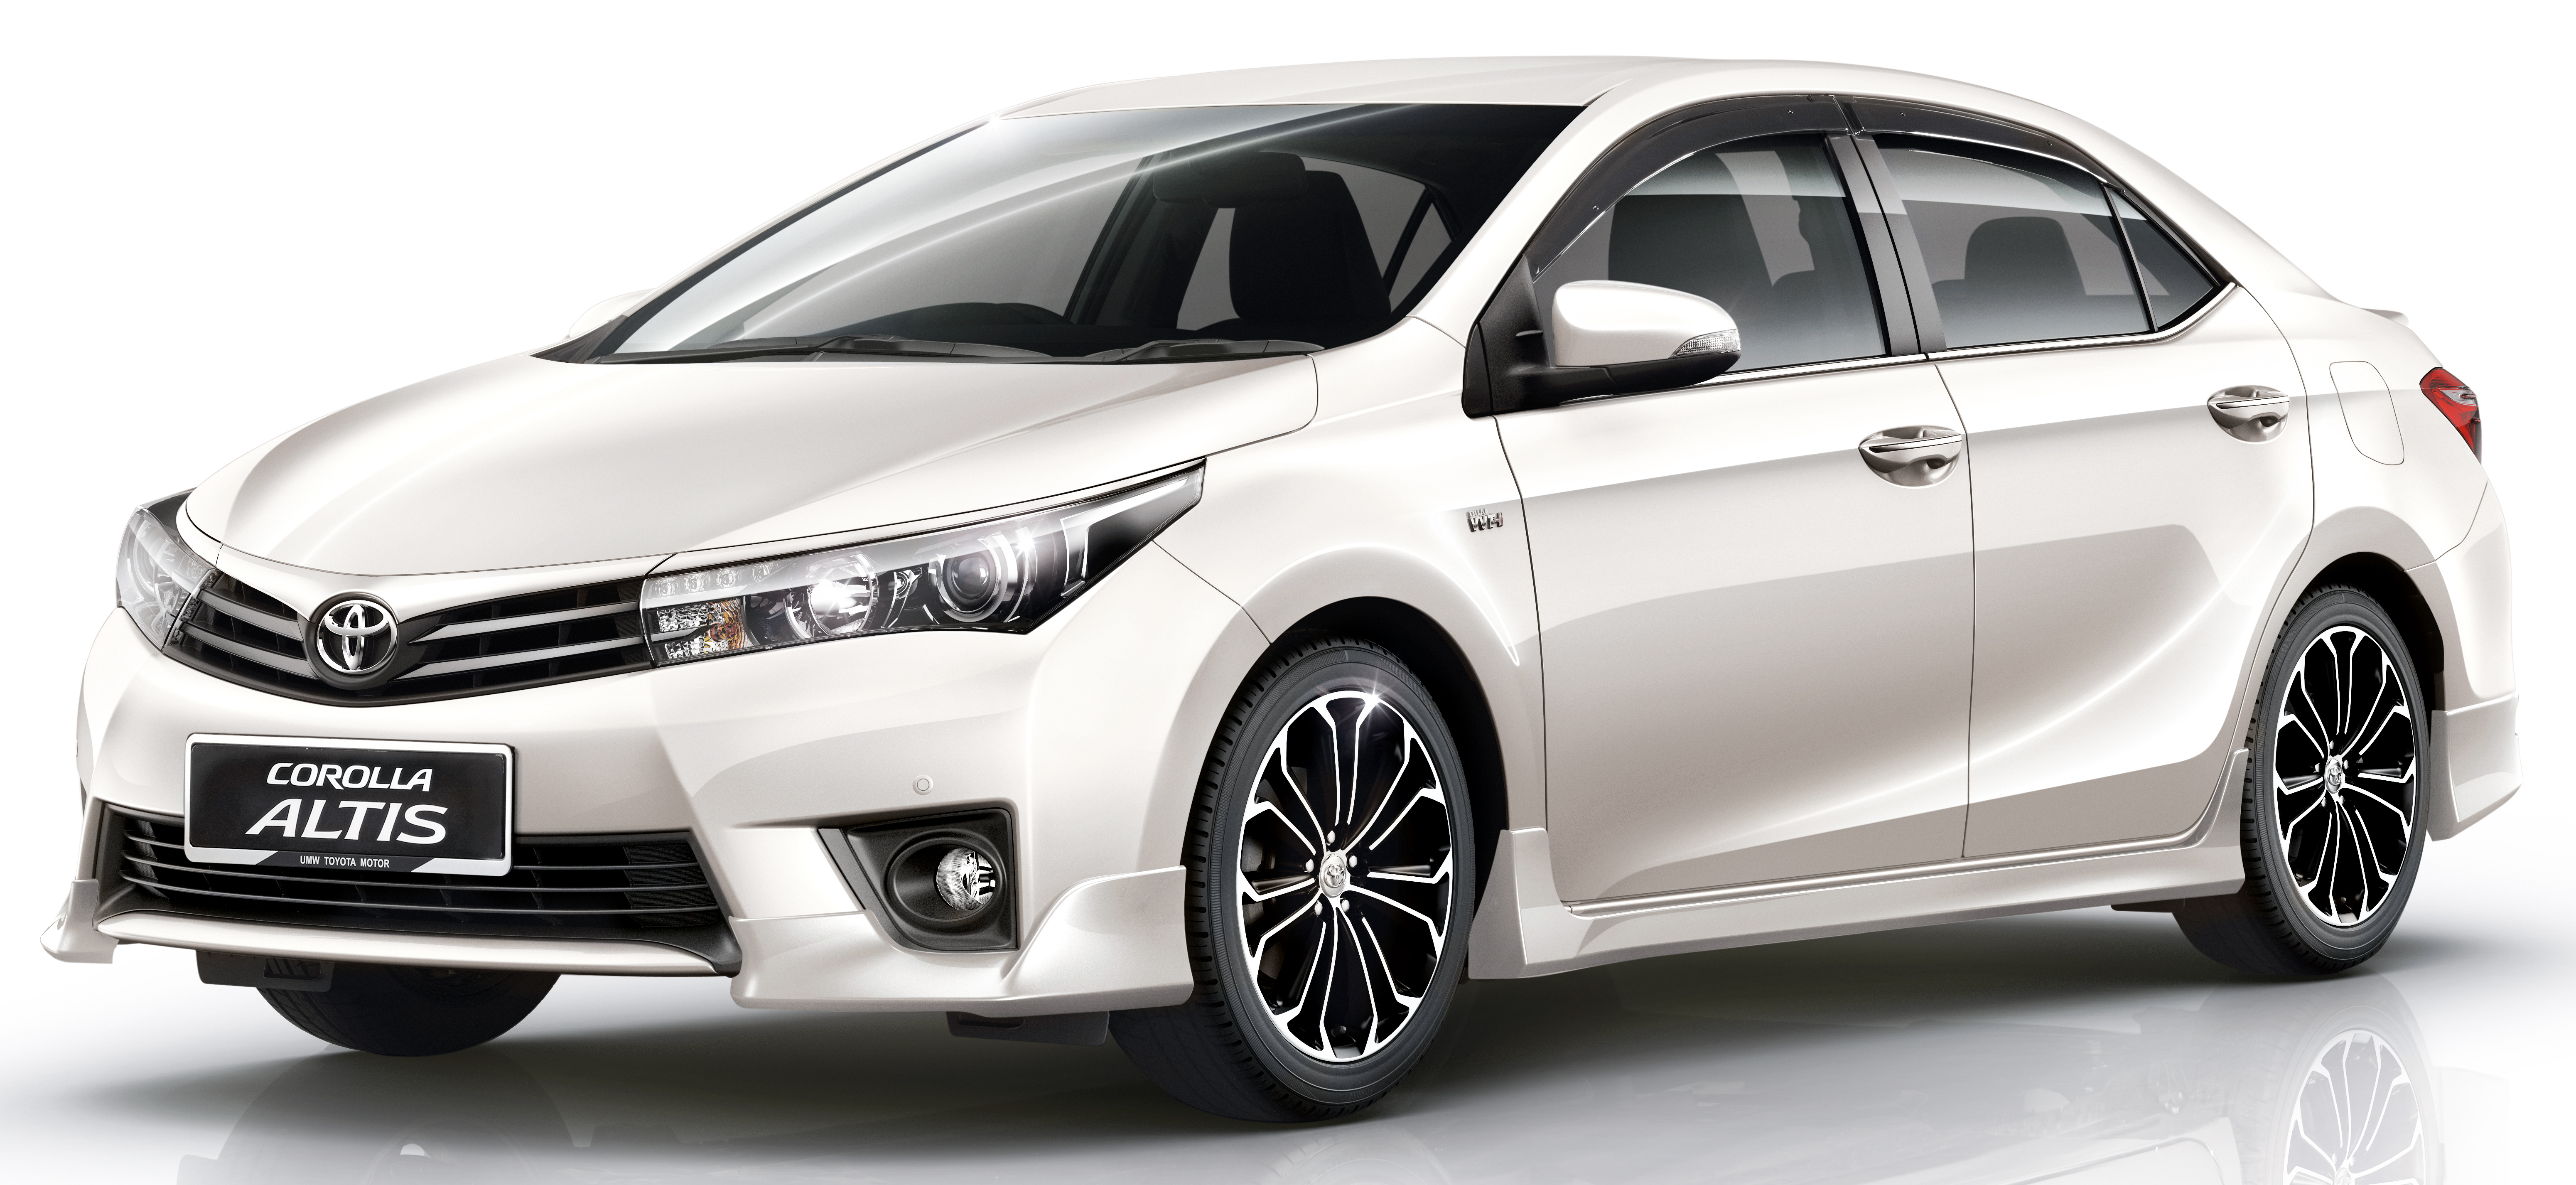 2014 Toyota Corolla Altis Malaysian prices confirmed ...